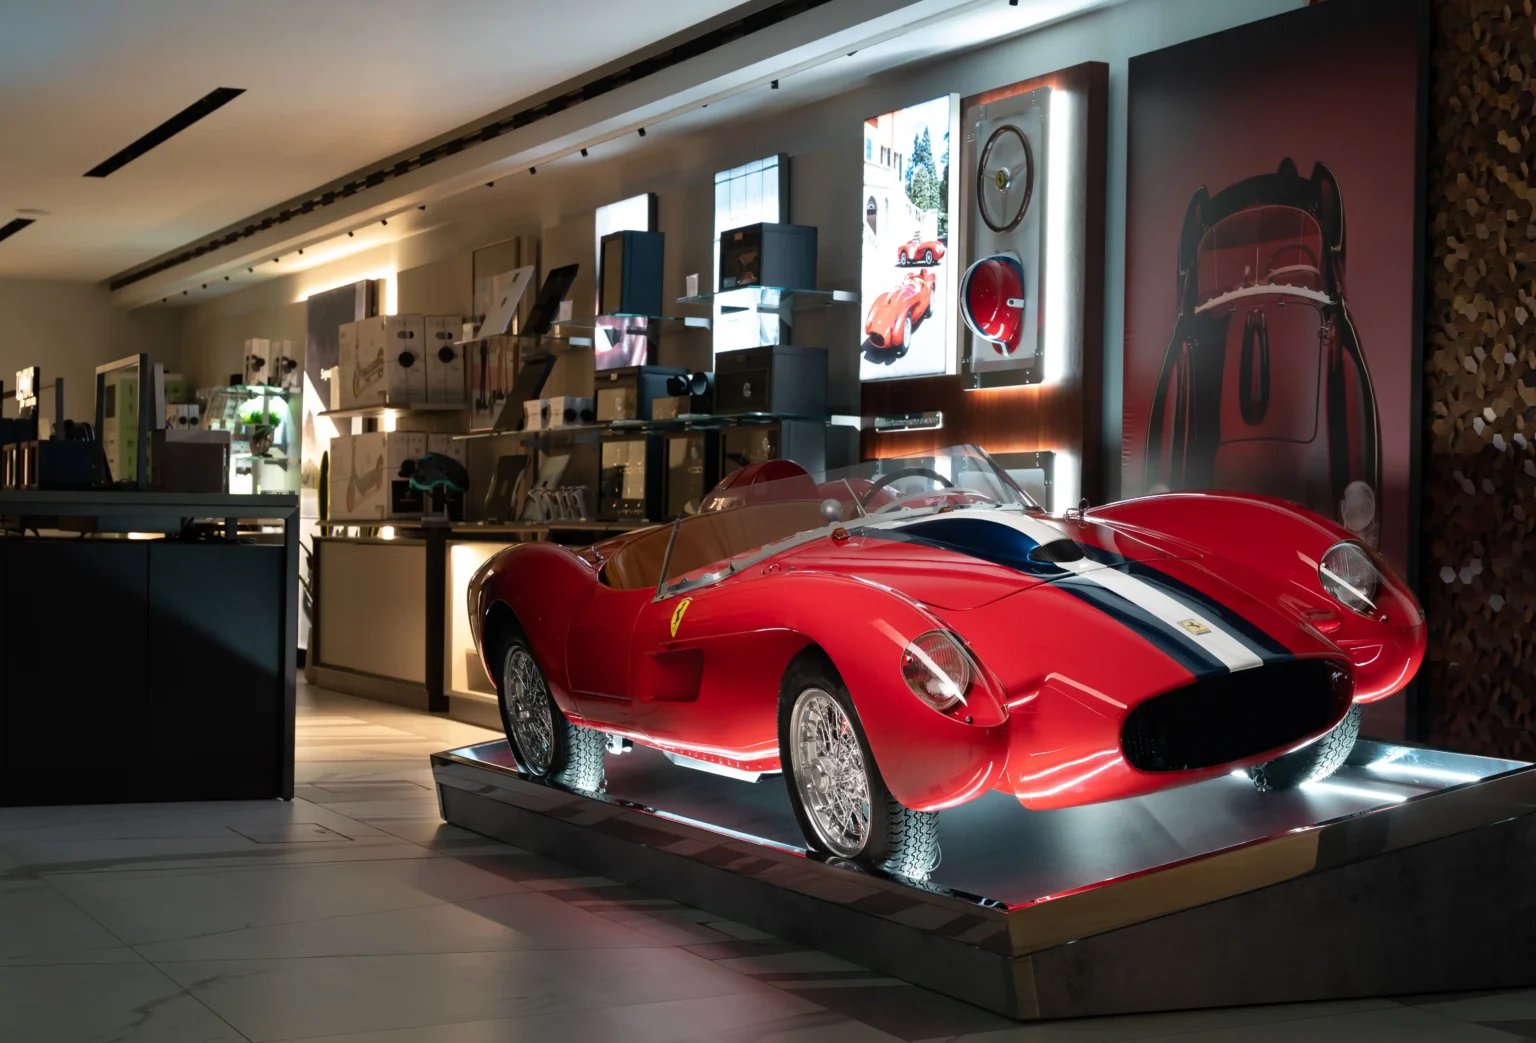 The ultimate toy car, a Ferrari Testa Rossa J, is on sale at Harrods for Christmas at £96,000. This battery-powered mini sports car reaches up to 50mph and is a collector's dream.